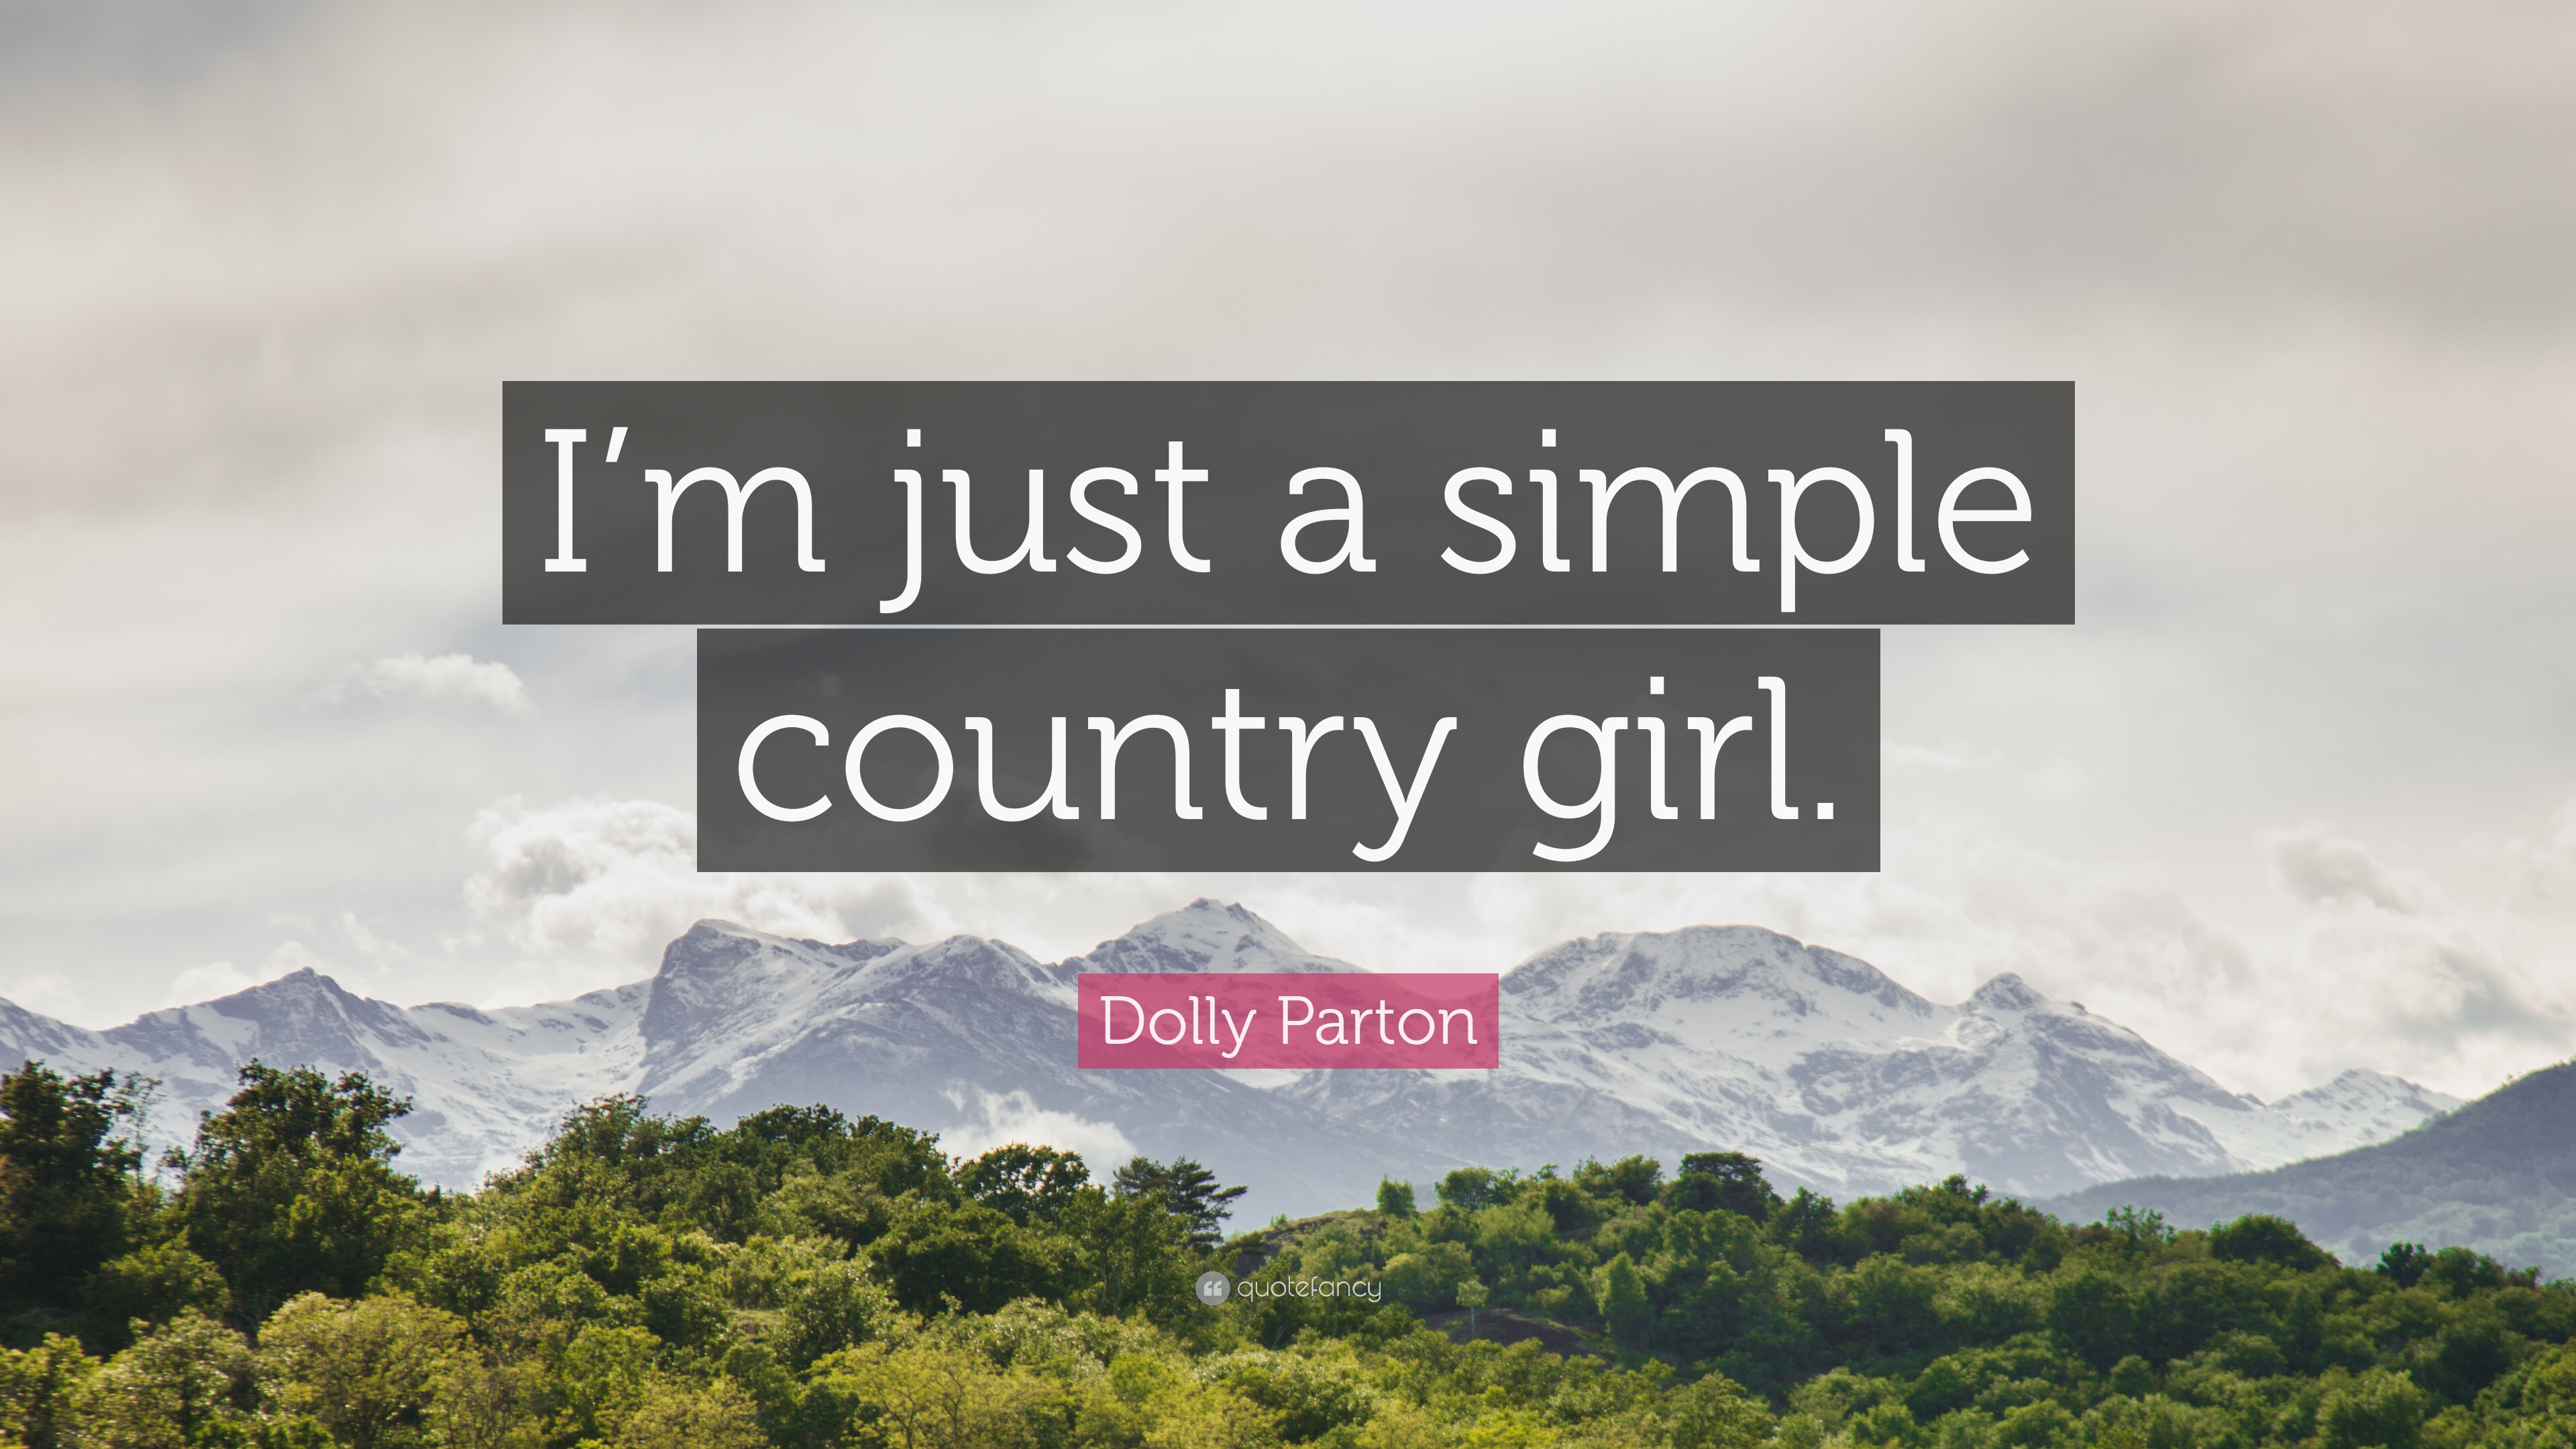 Dolly Parton Quote: “I'm just a simple country girl.” 12